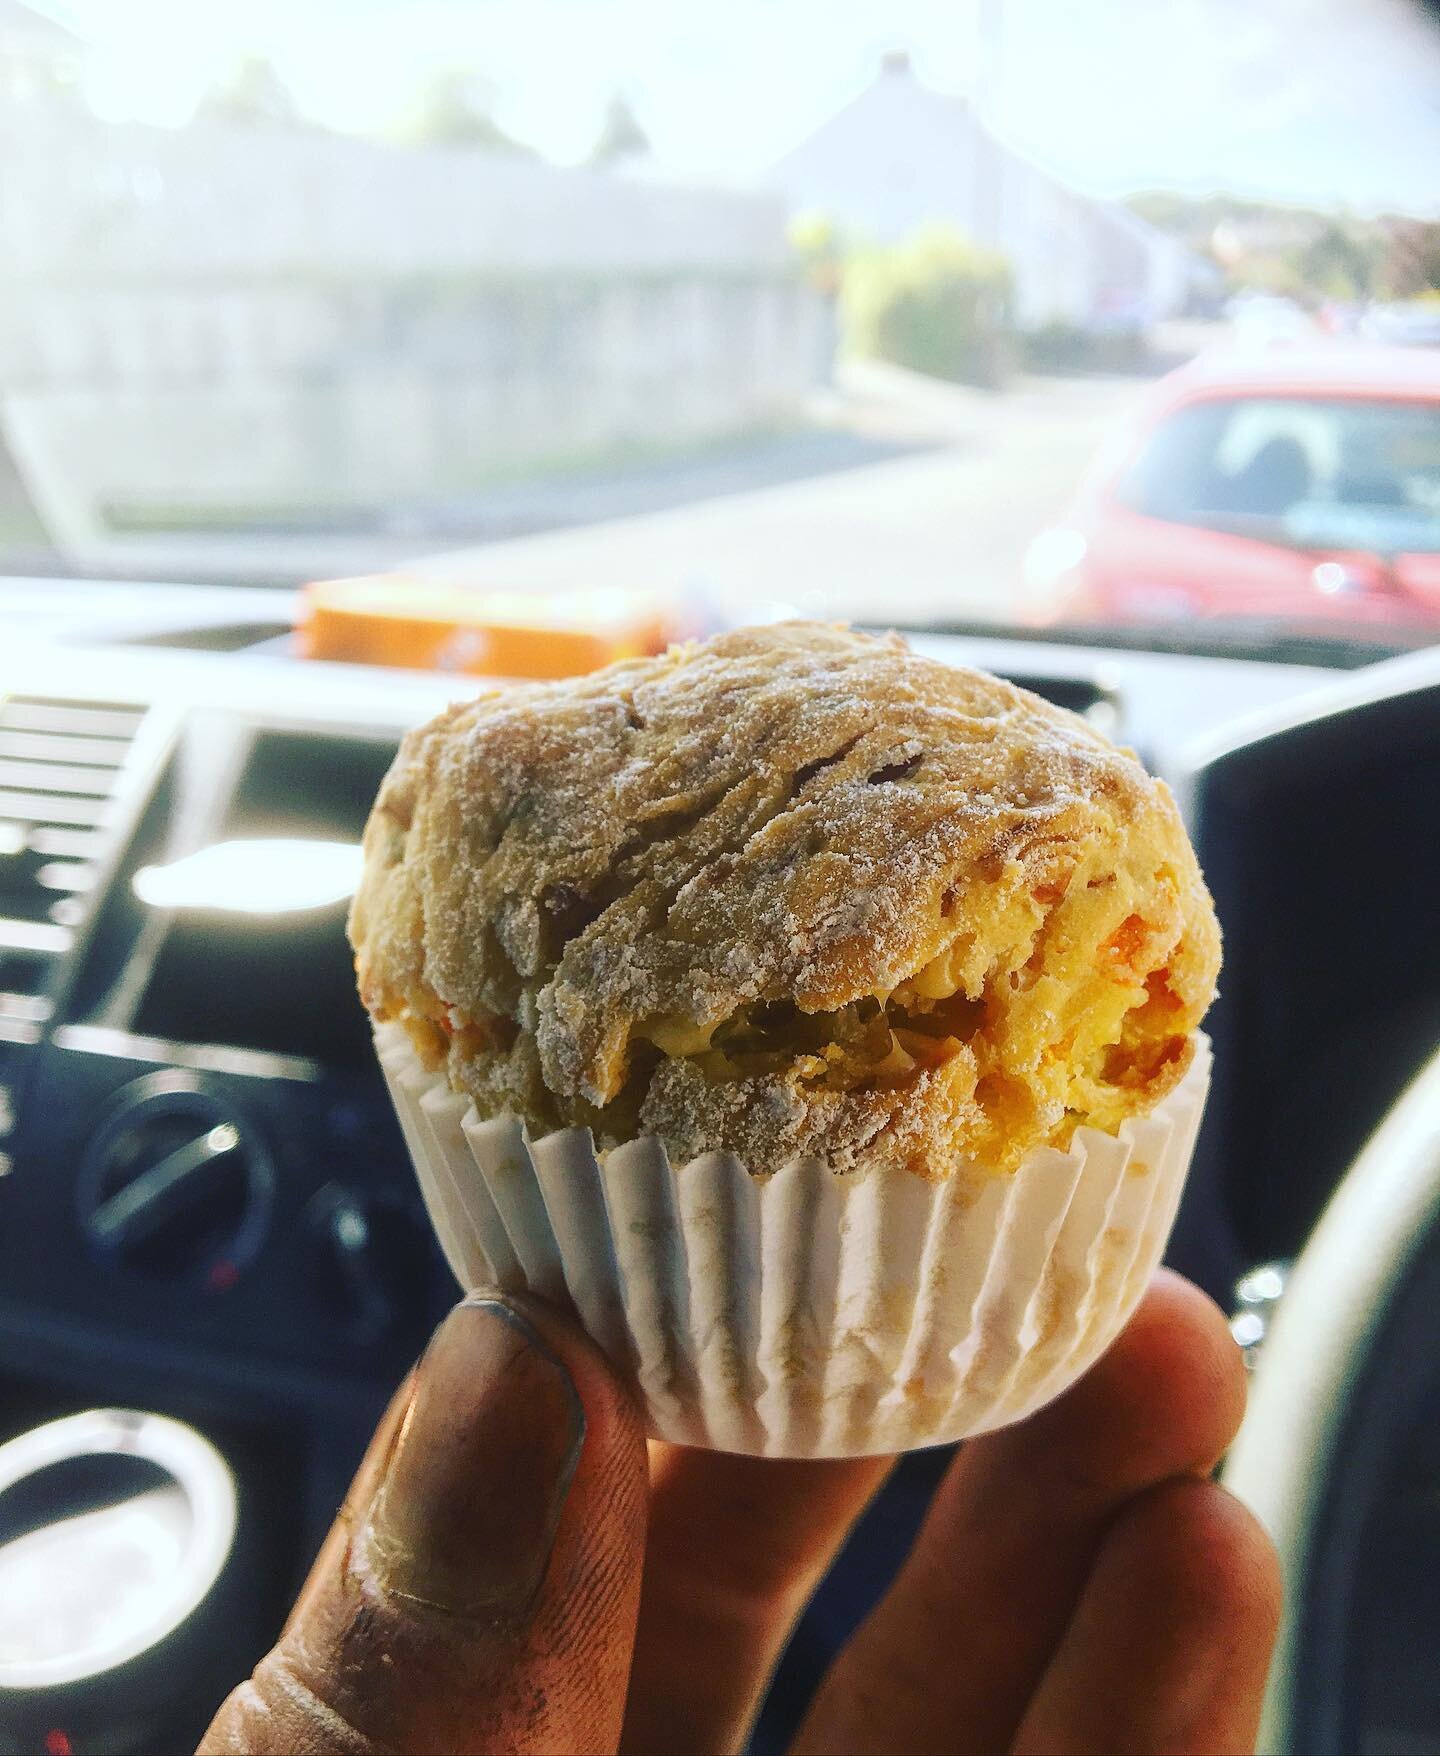 When you&rsquo;re in your last month of veg deliveries and @leezanndavies whacks out a freshly baked vegan cheese zucchini and carrot scone ball thing! Pow! Delivering is such a tough headspace to be in, it takes a patient person to be relaxed and ca